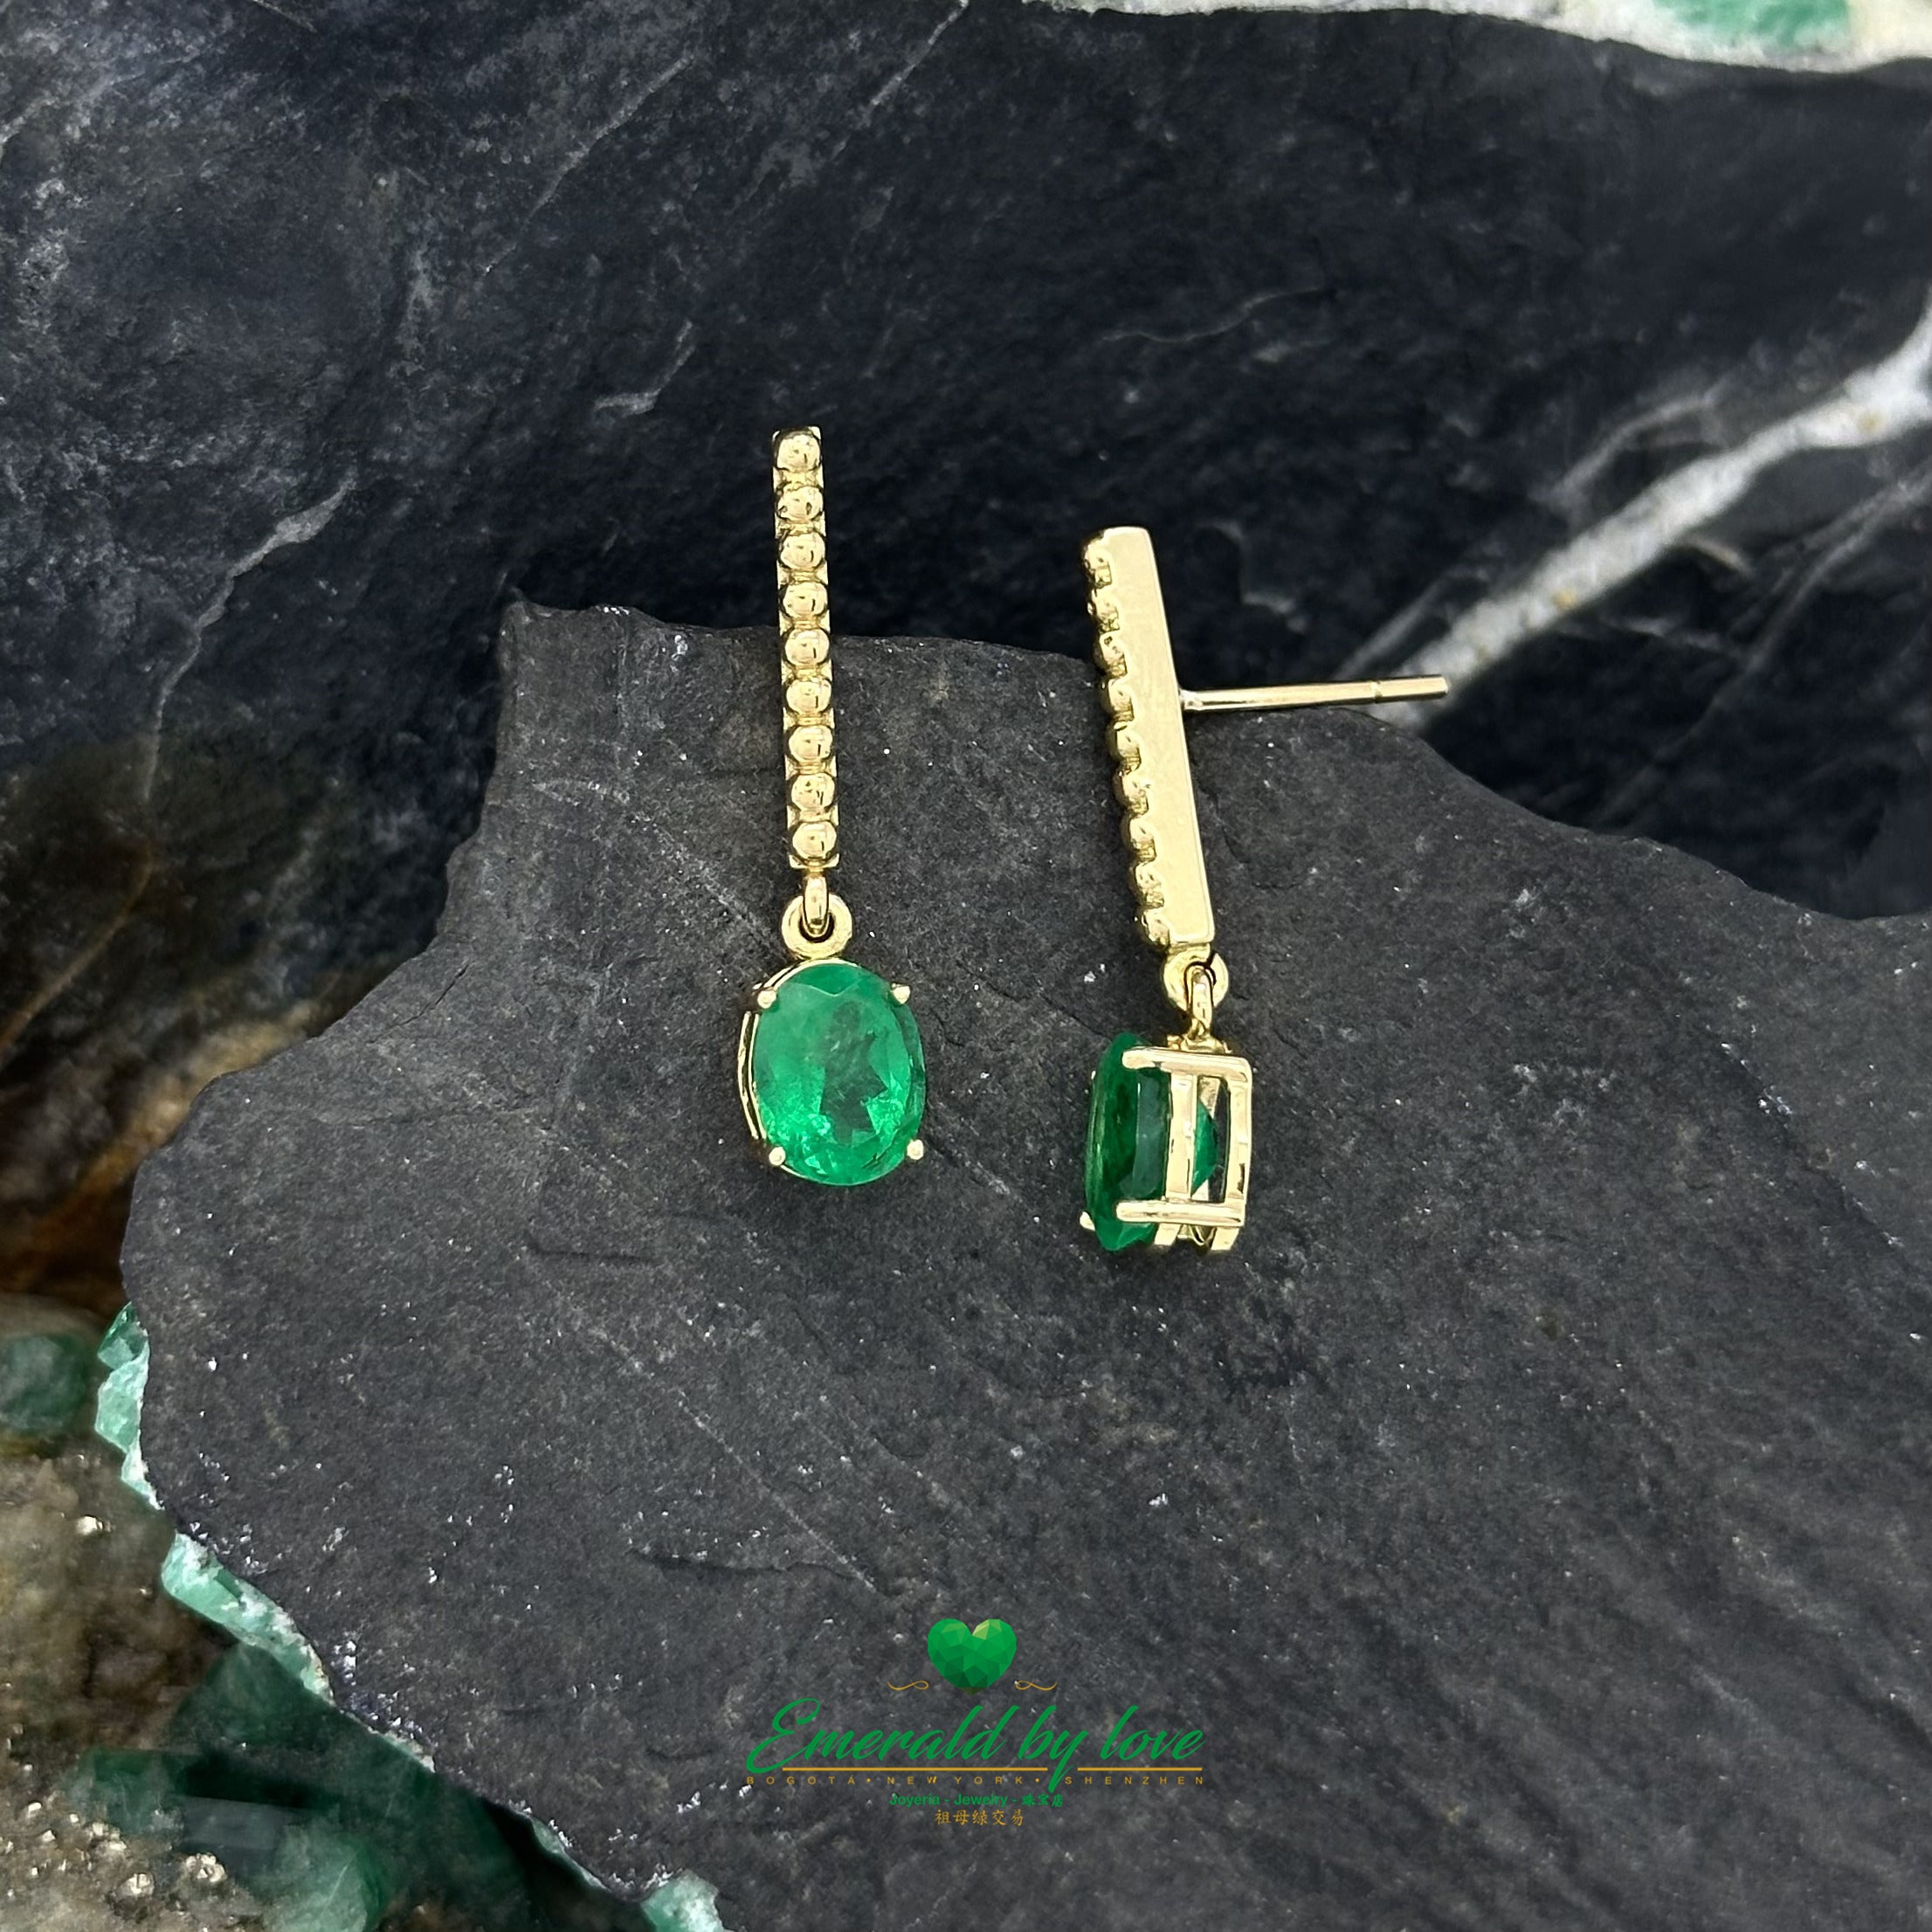 Golden Elegance: Oval Emerald Long Earrings with Round Textured Design